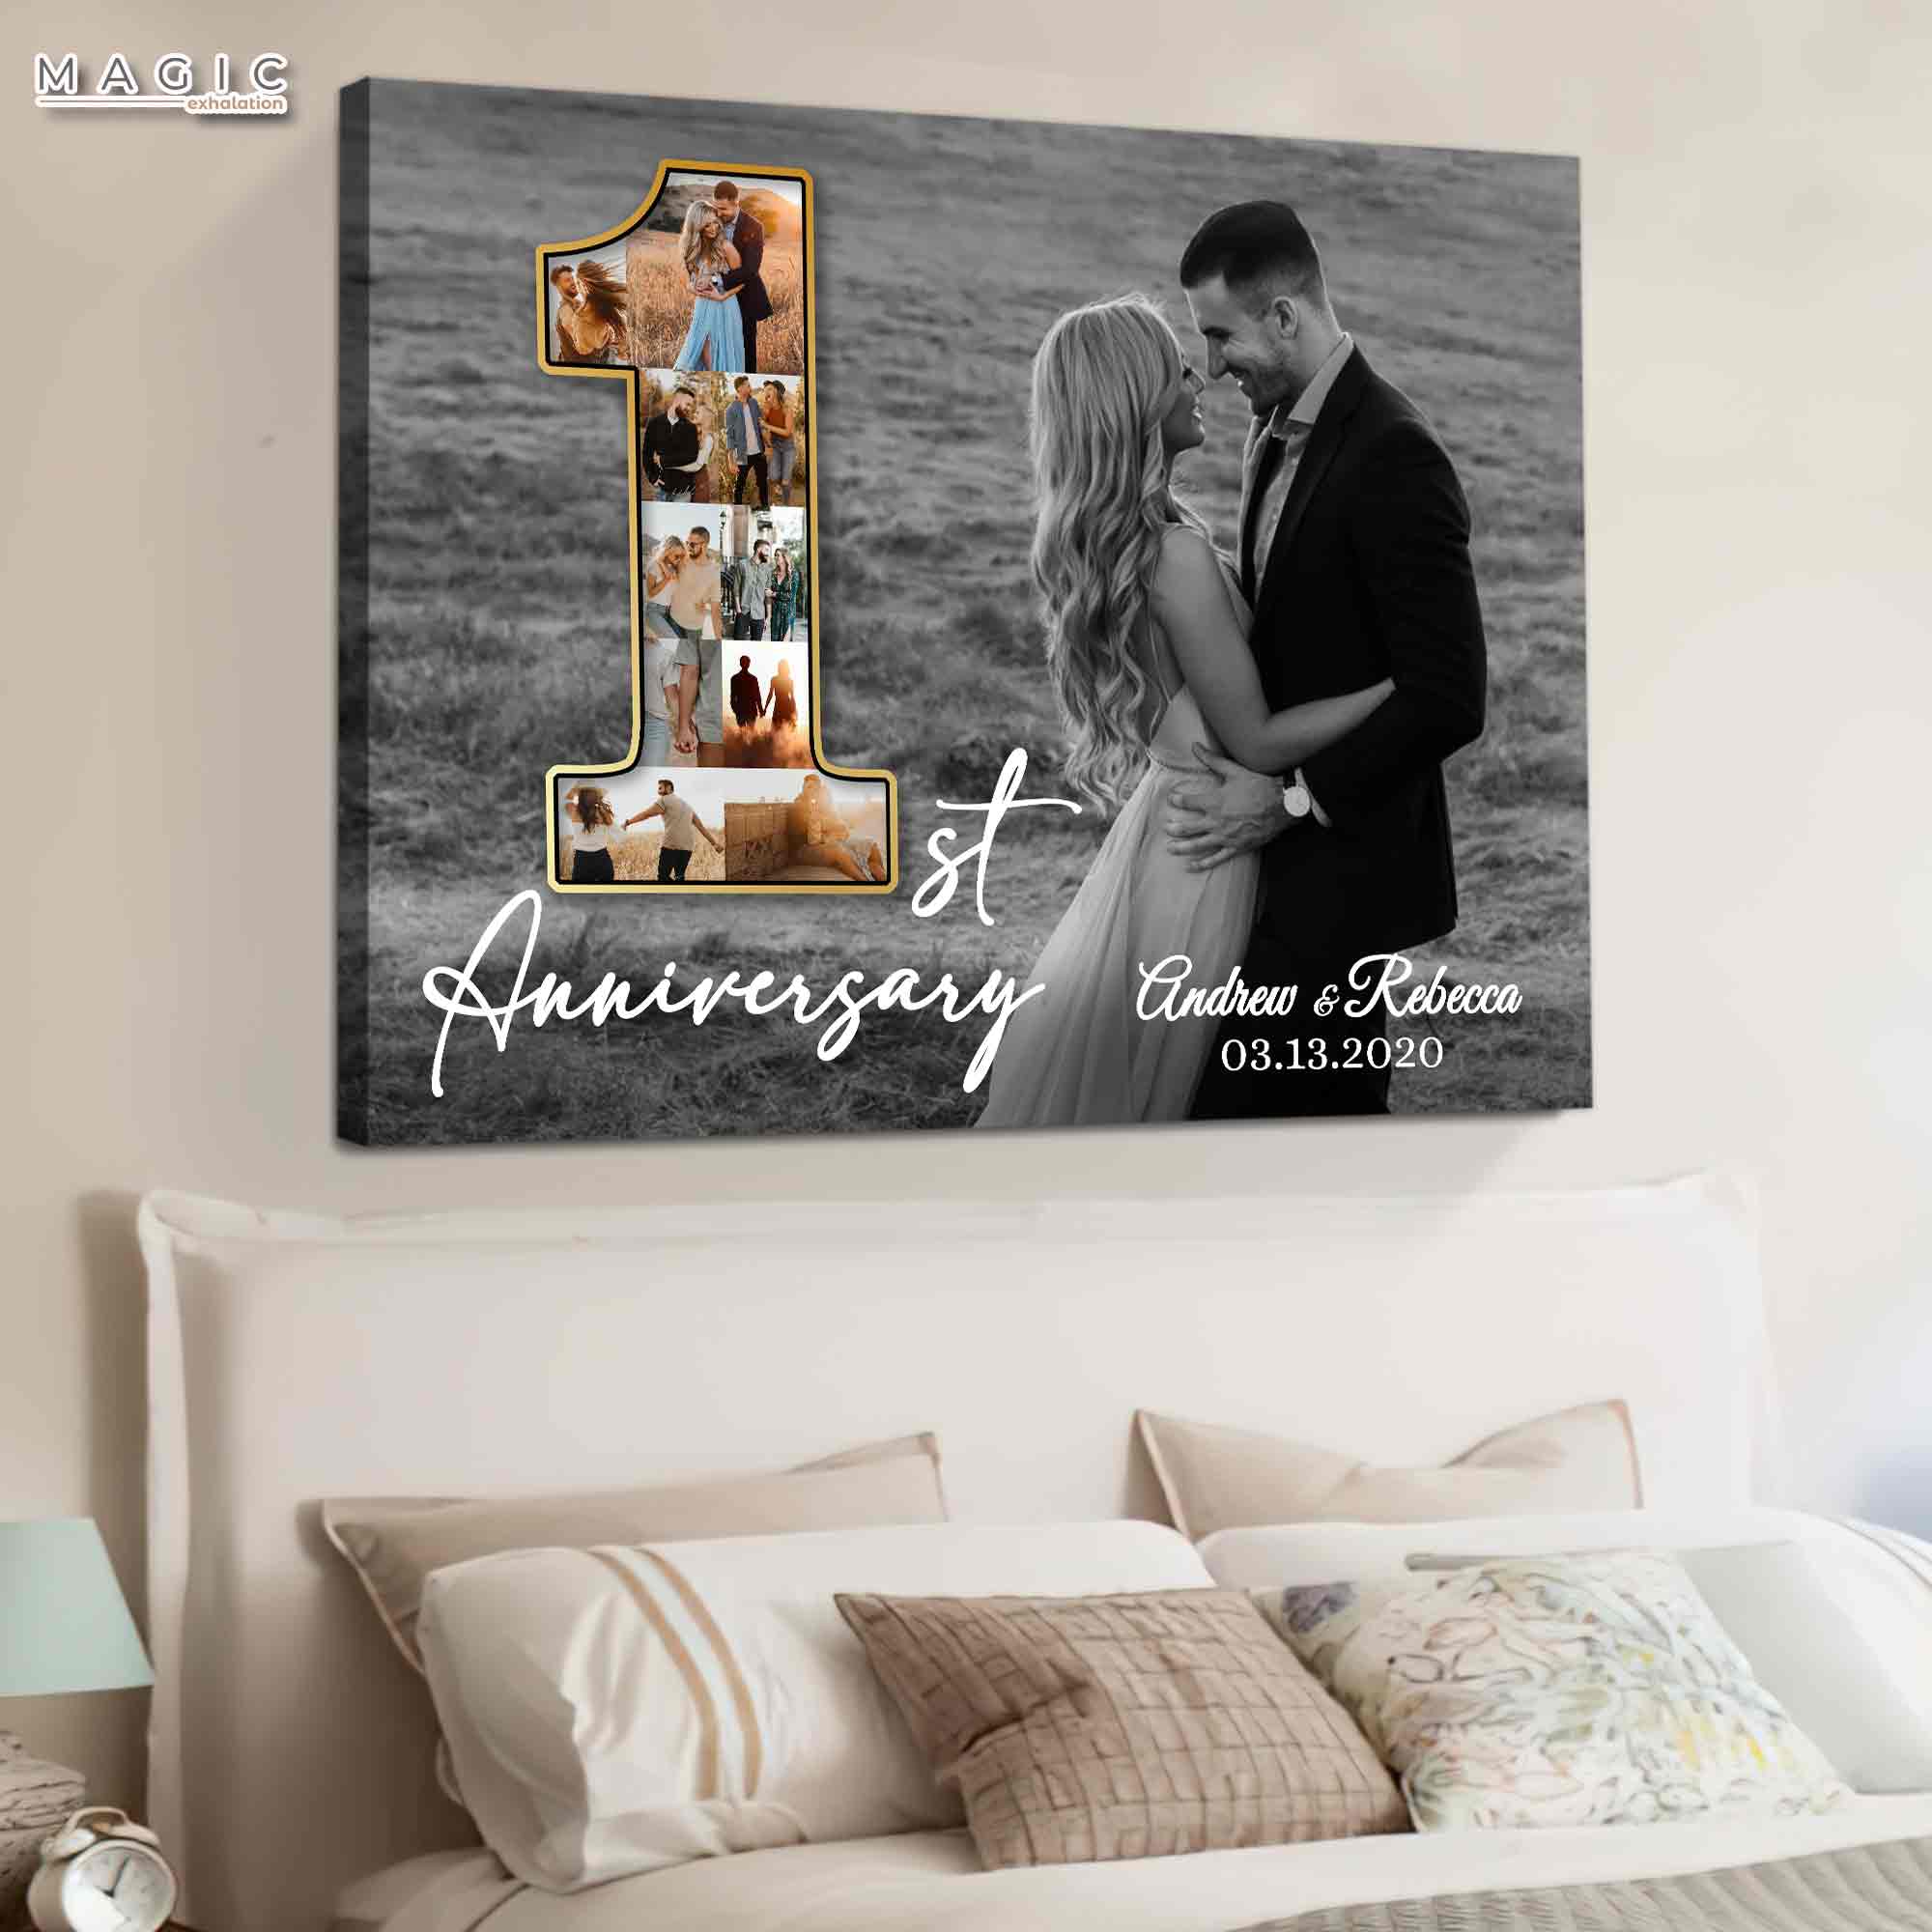 one year anniversary gifts for wife, paper gift ideas anniversary,